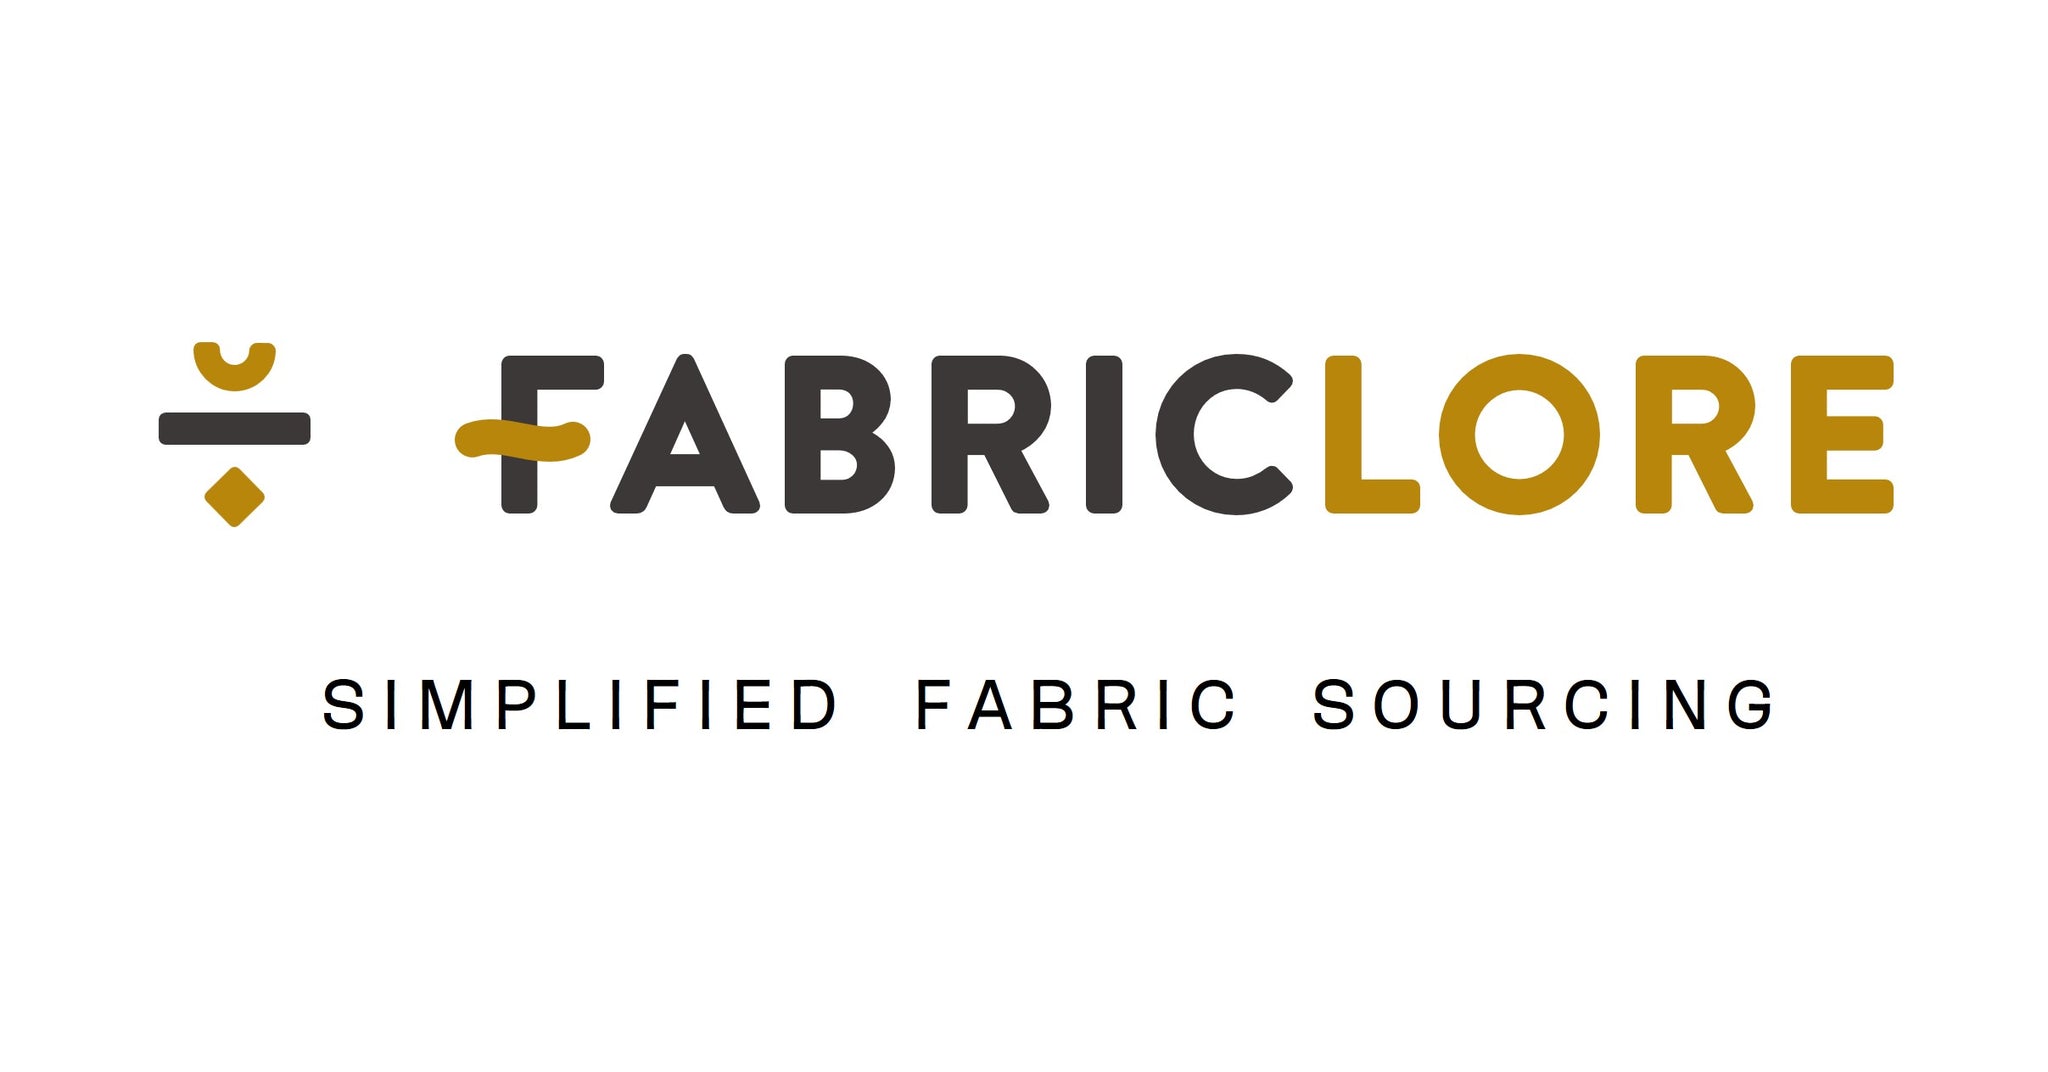 Wholesale Fabric Manufacturers - India's #1 Fabric & Dress Material Supplier